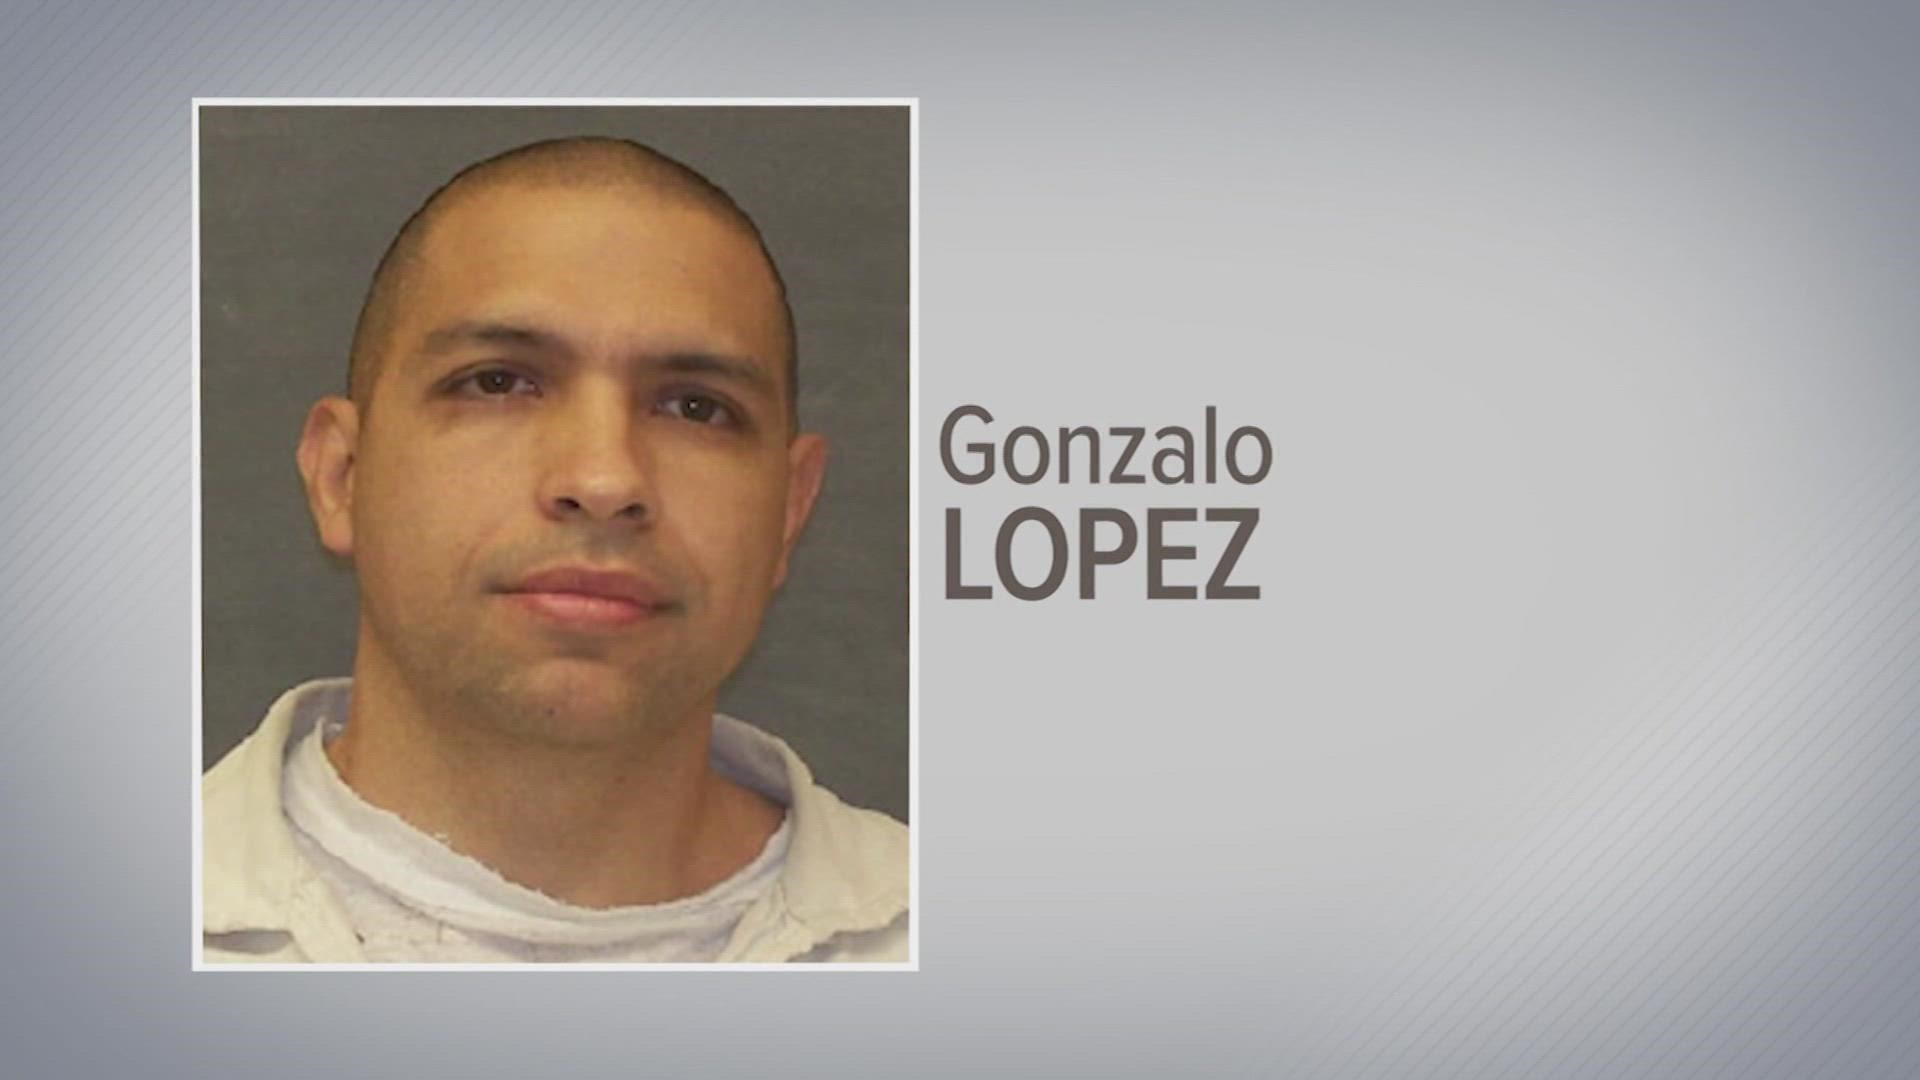 Gonzalo Lopez has been missing for more than a day. TDCJ is offering a reward of $22,500 for information leading to the capture and arrest of the escaped convict.